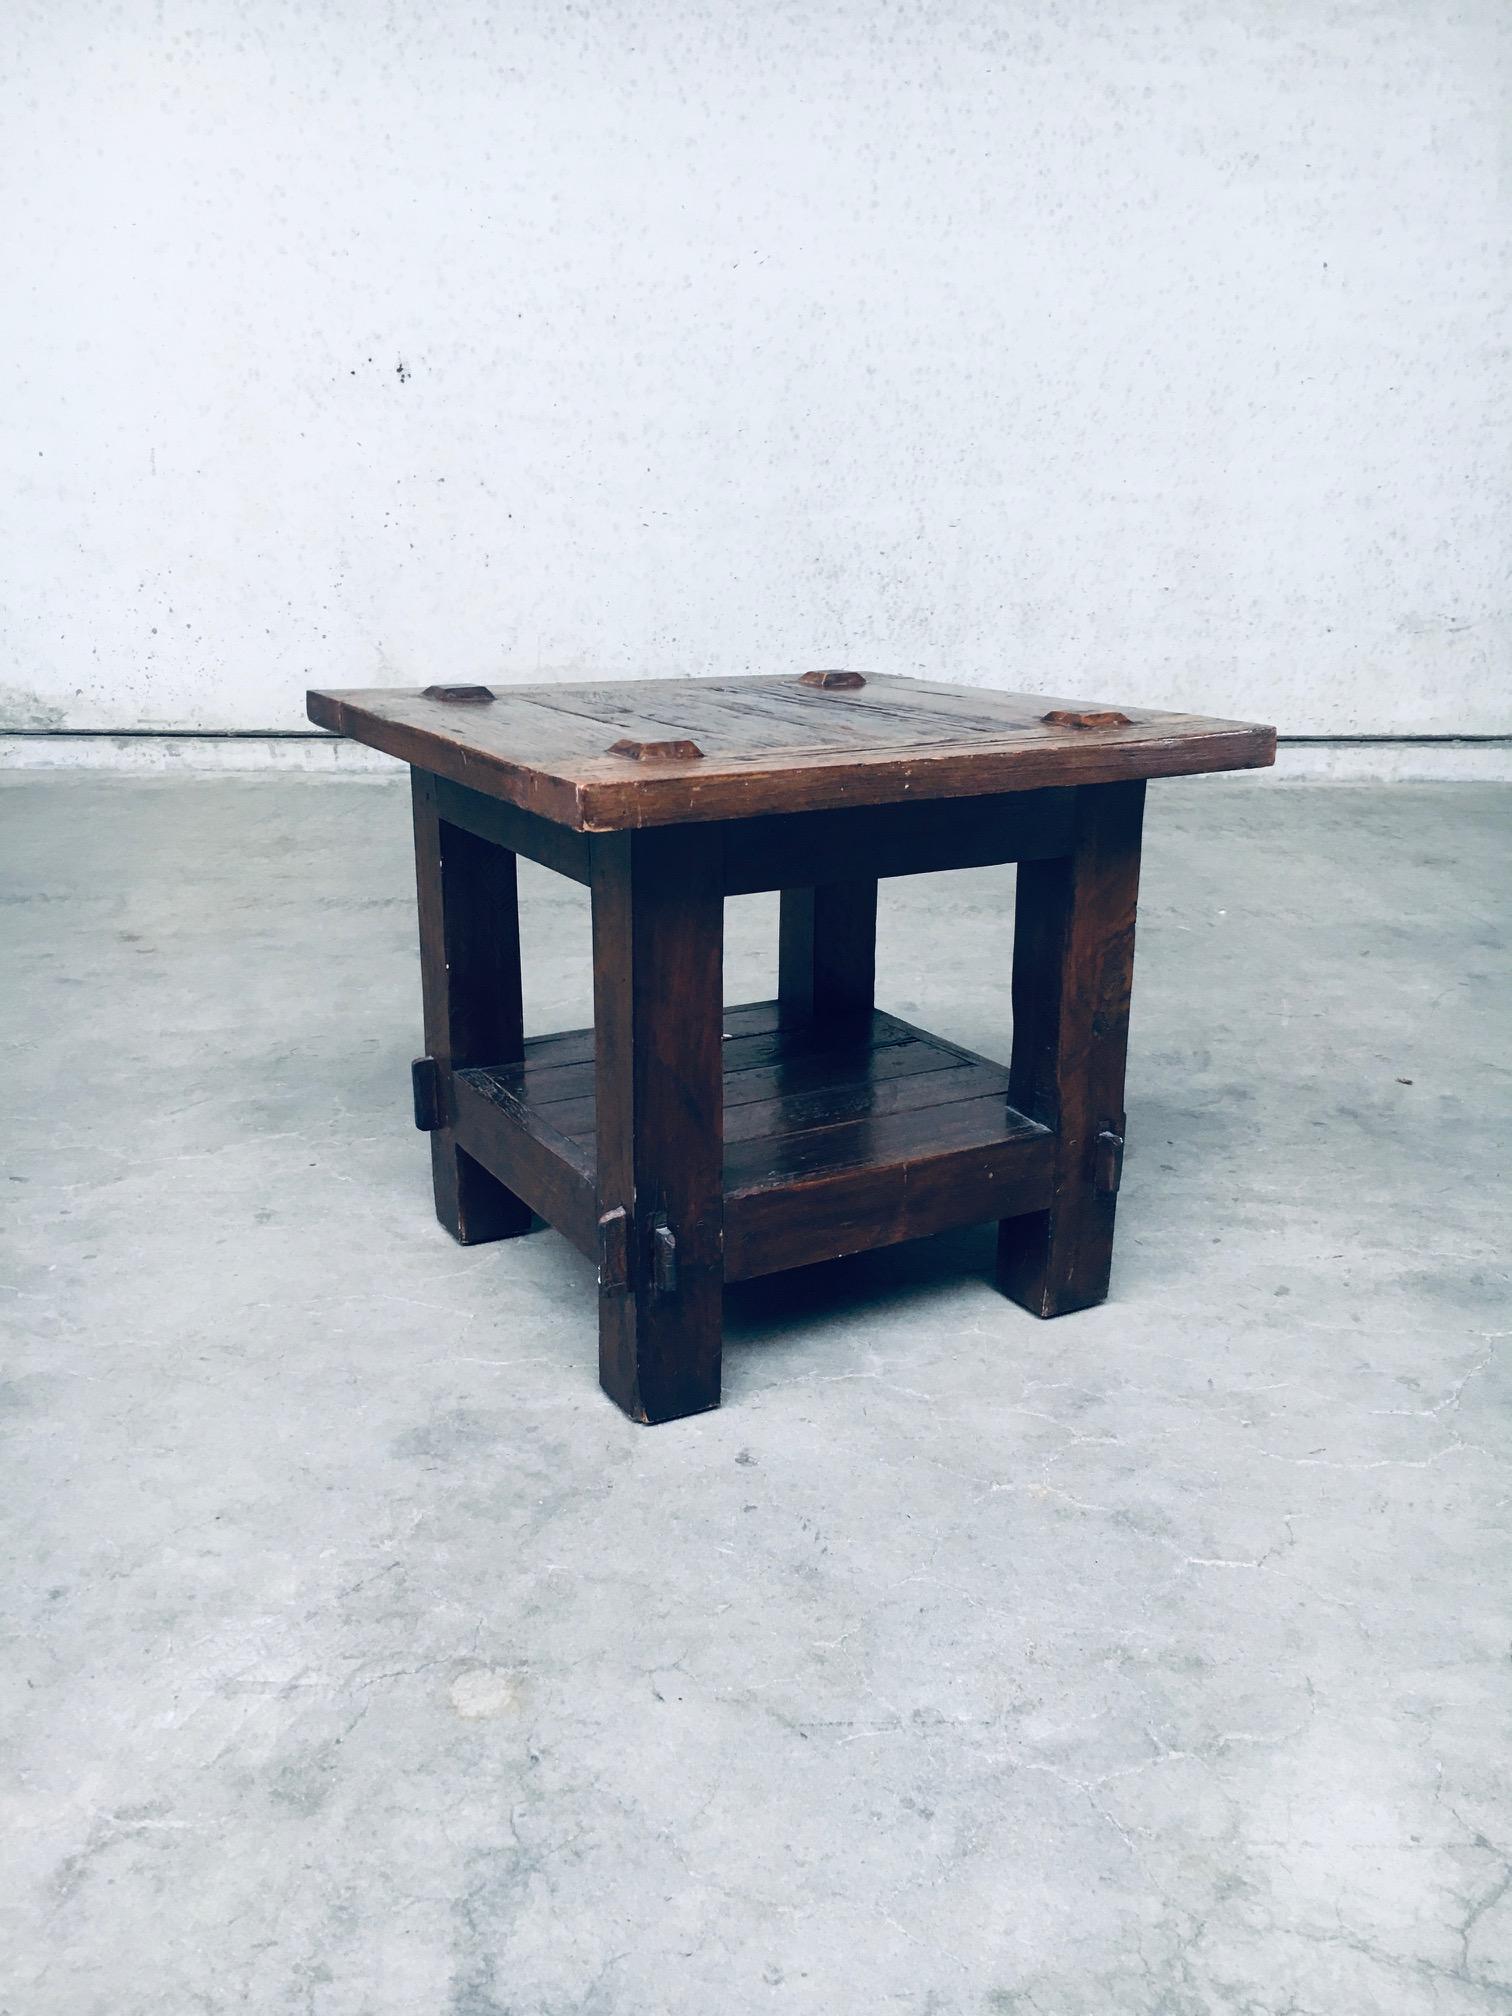 Vintage Wabi Sabi style design solid oak side table. Made in France in the 1930's. Solid oak wood constructed square side table with visible construction joints. Well proportioned side table in all original very good condition. Measures 52cm x 60cm